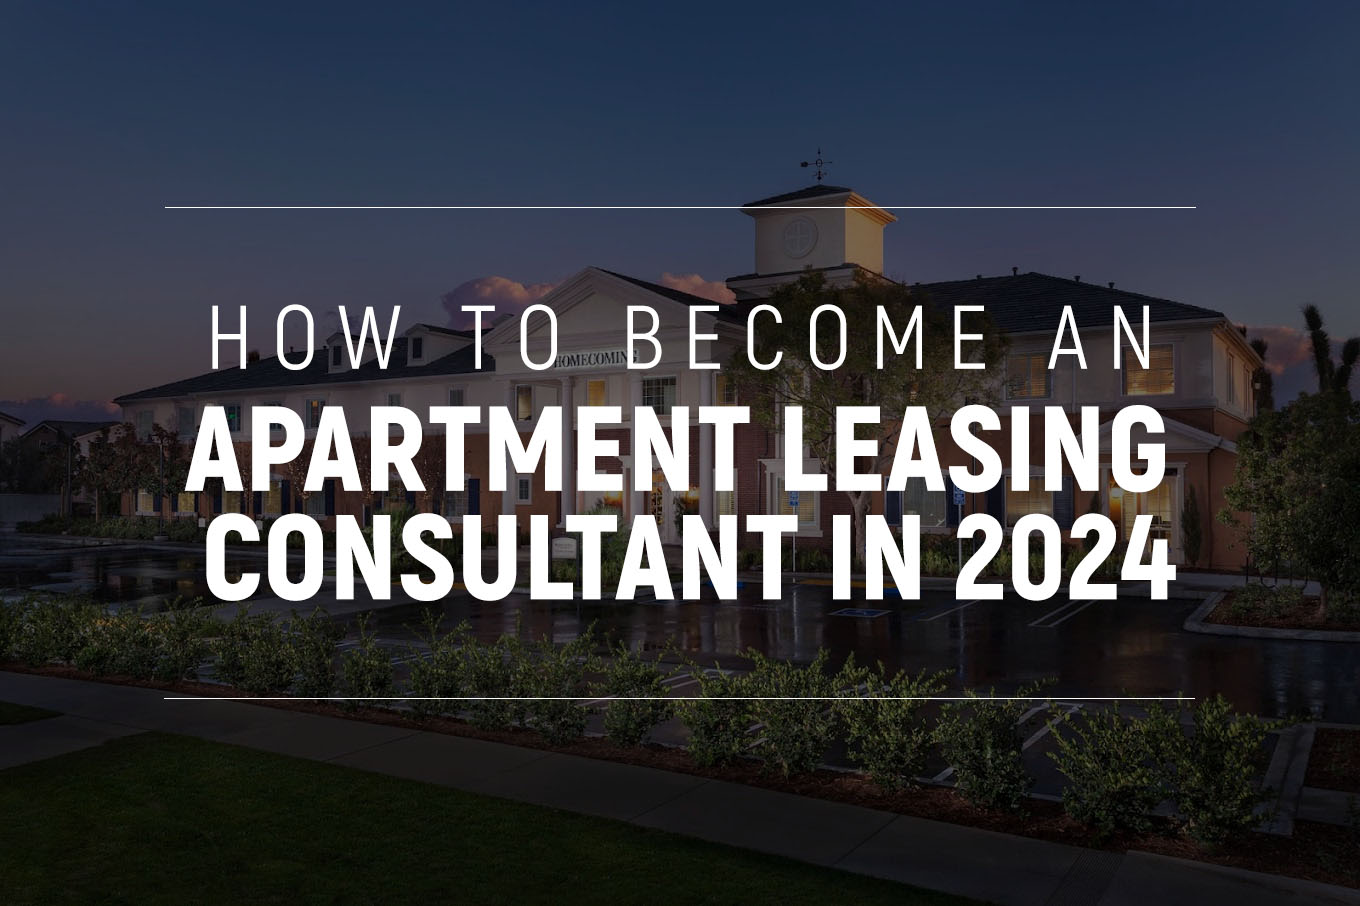 How to Become an Apartment Leasing Consultant in 2024